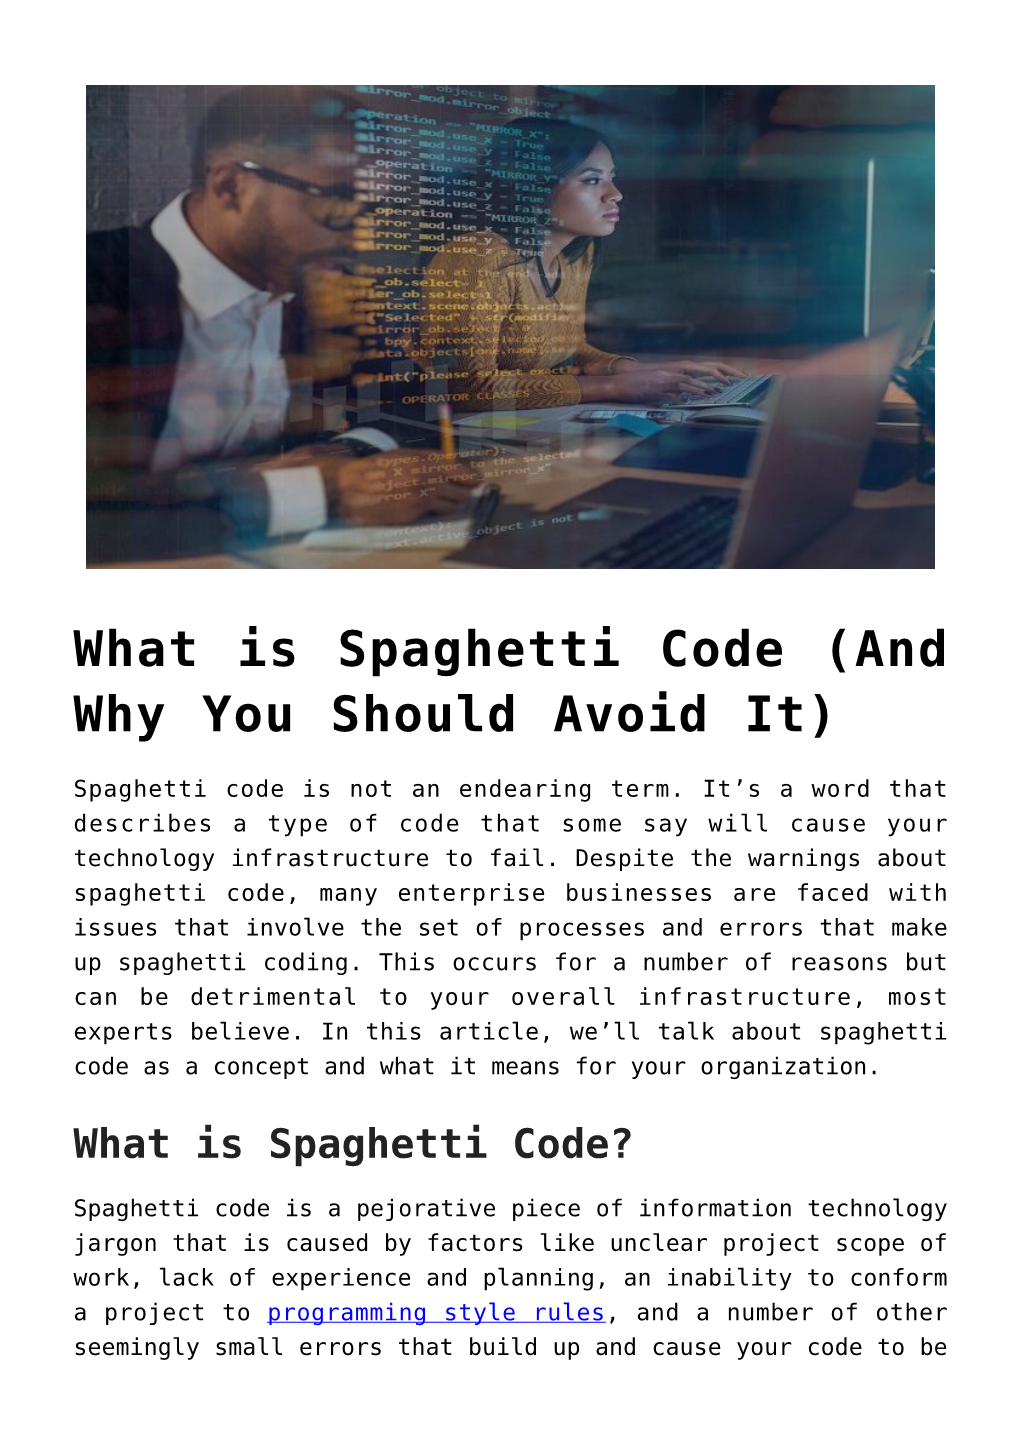 What Is Spaghetti Code (And Why You Should Avoid It)